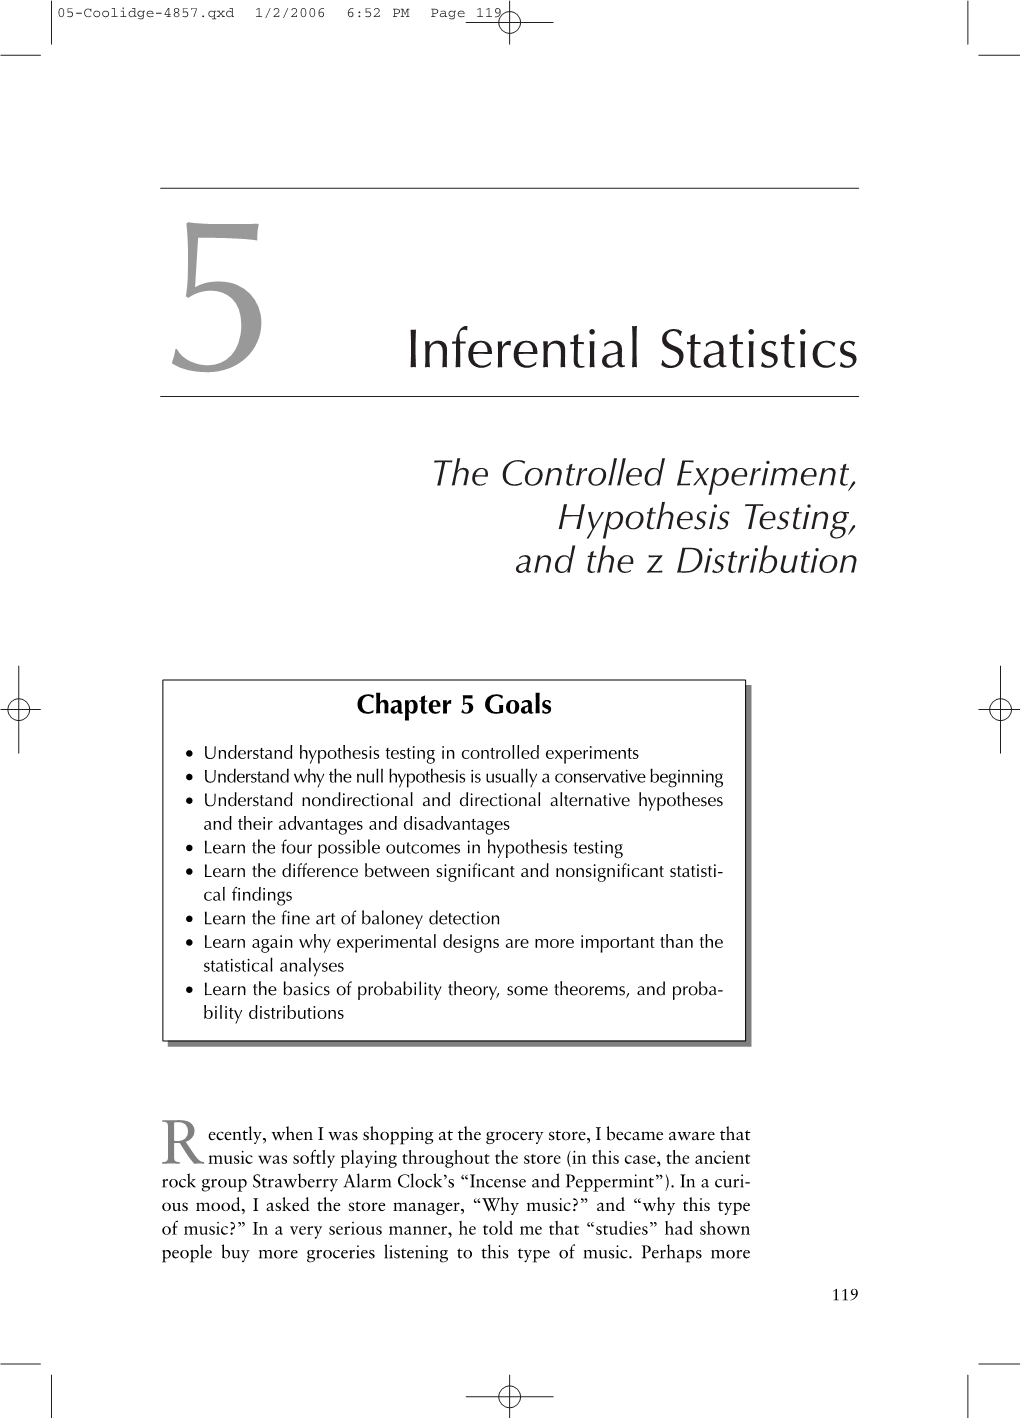 Inferential Statistics the Controlled Experiment, Hypothesis Testing, and the Z Distribution